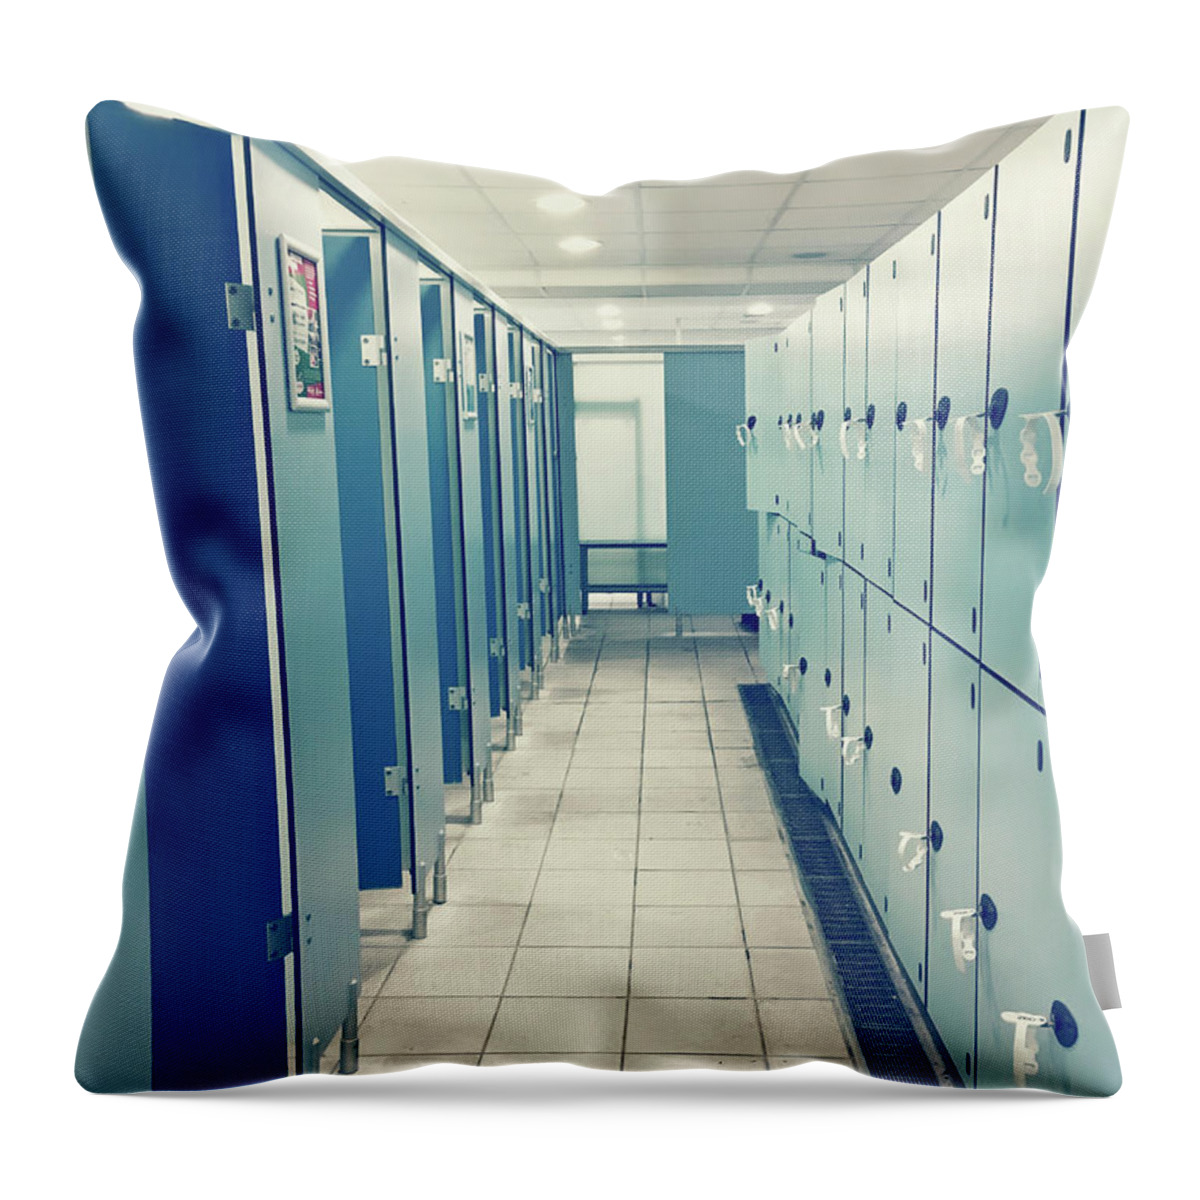 Background Throw Pillow featuring the photograph A changing room by Tom Gowanlock